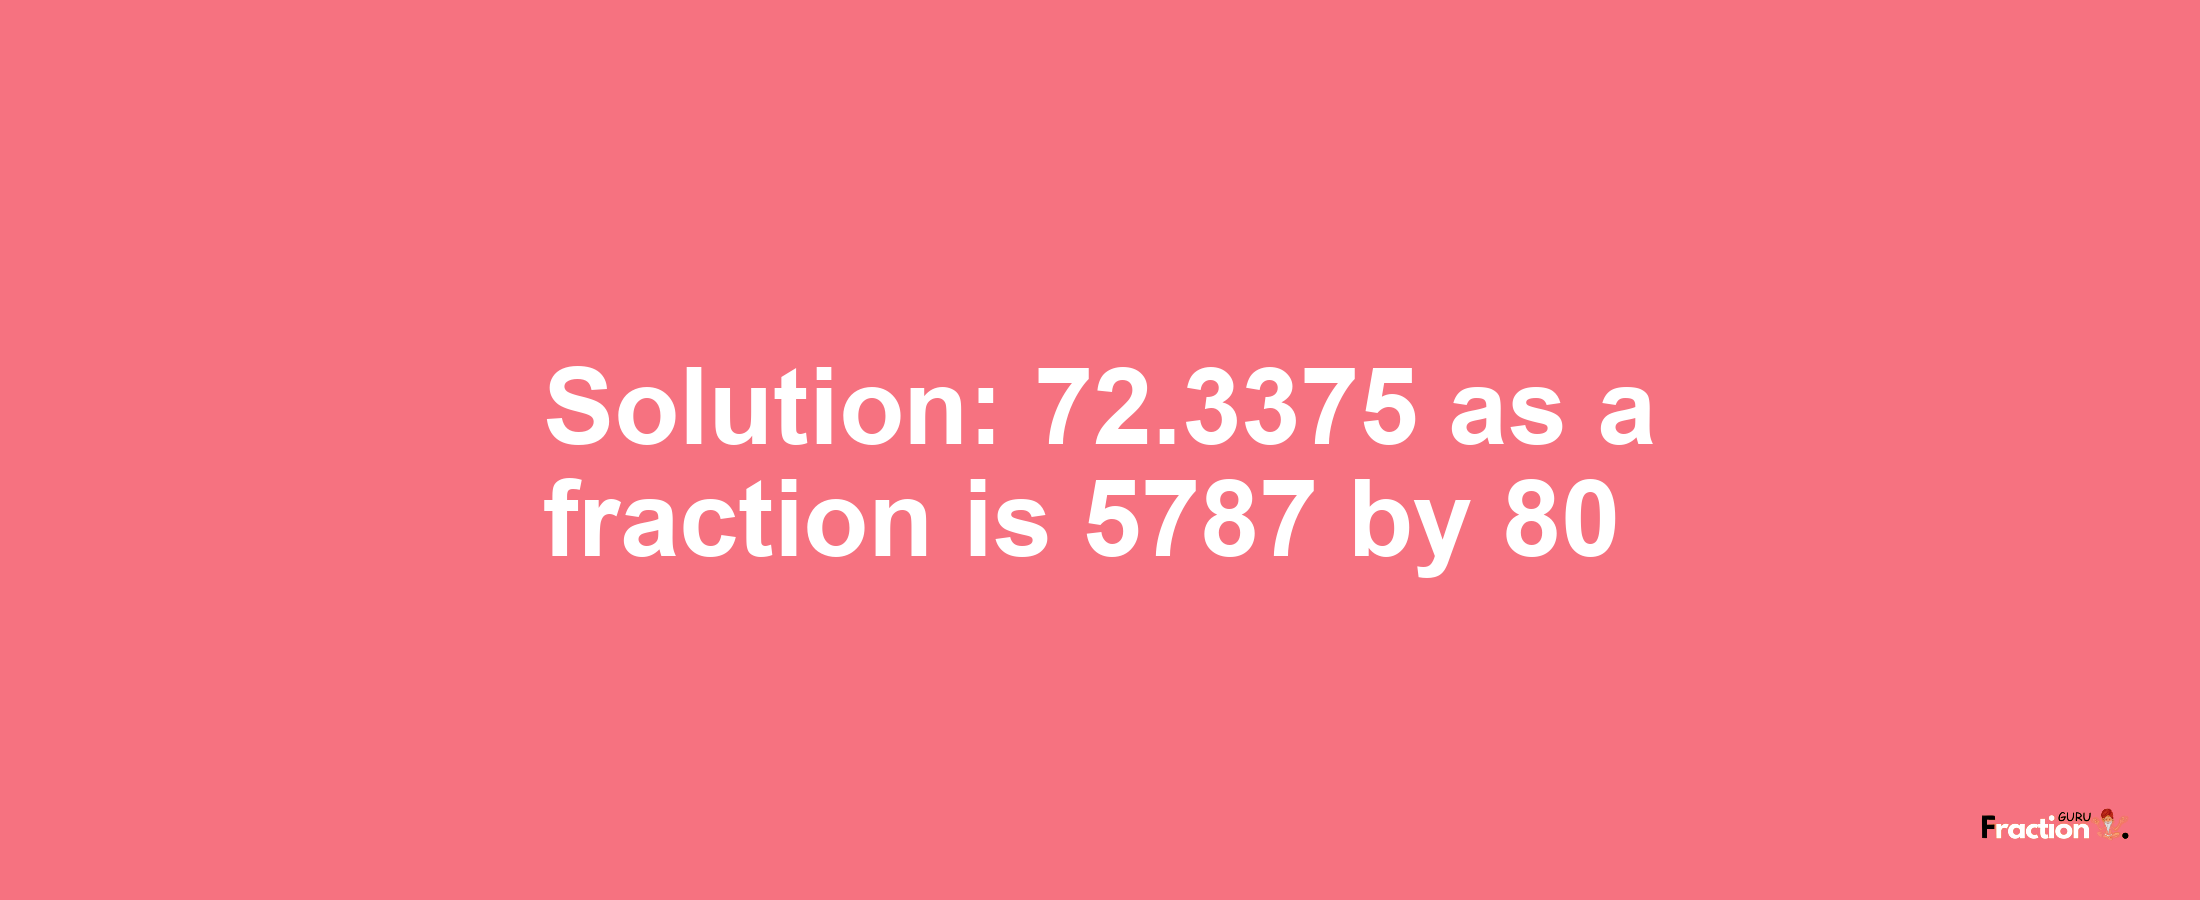 Solution:72.3375 as a fraction is 5787/80